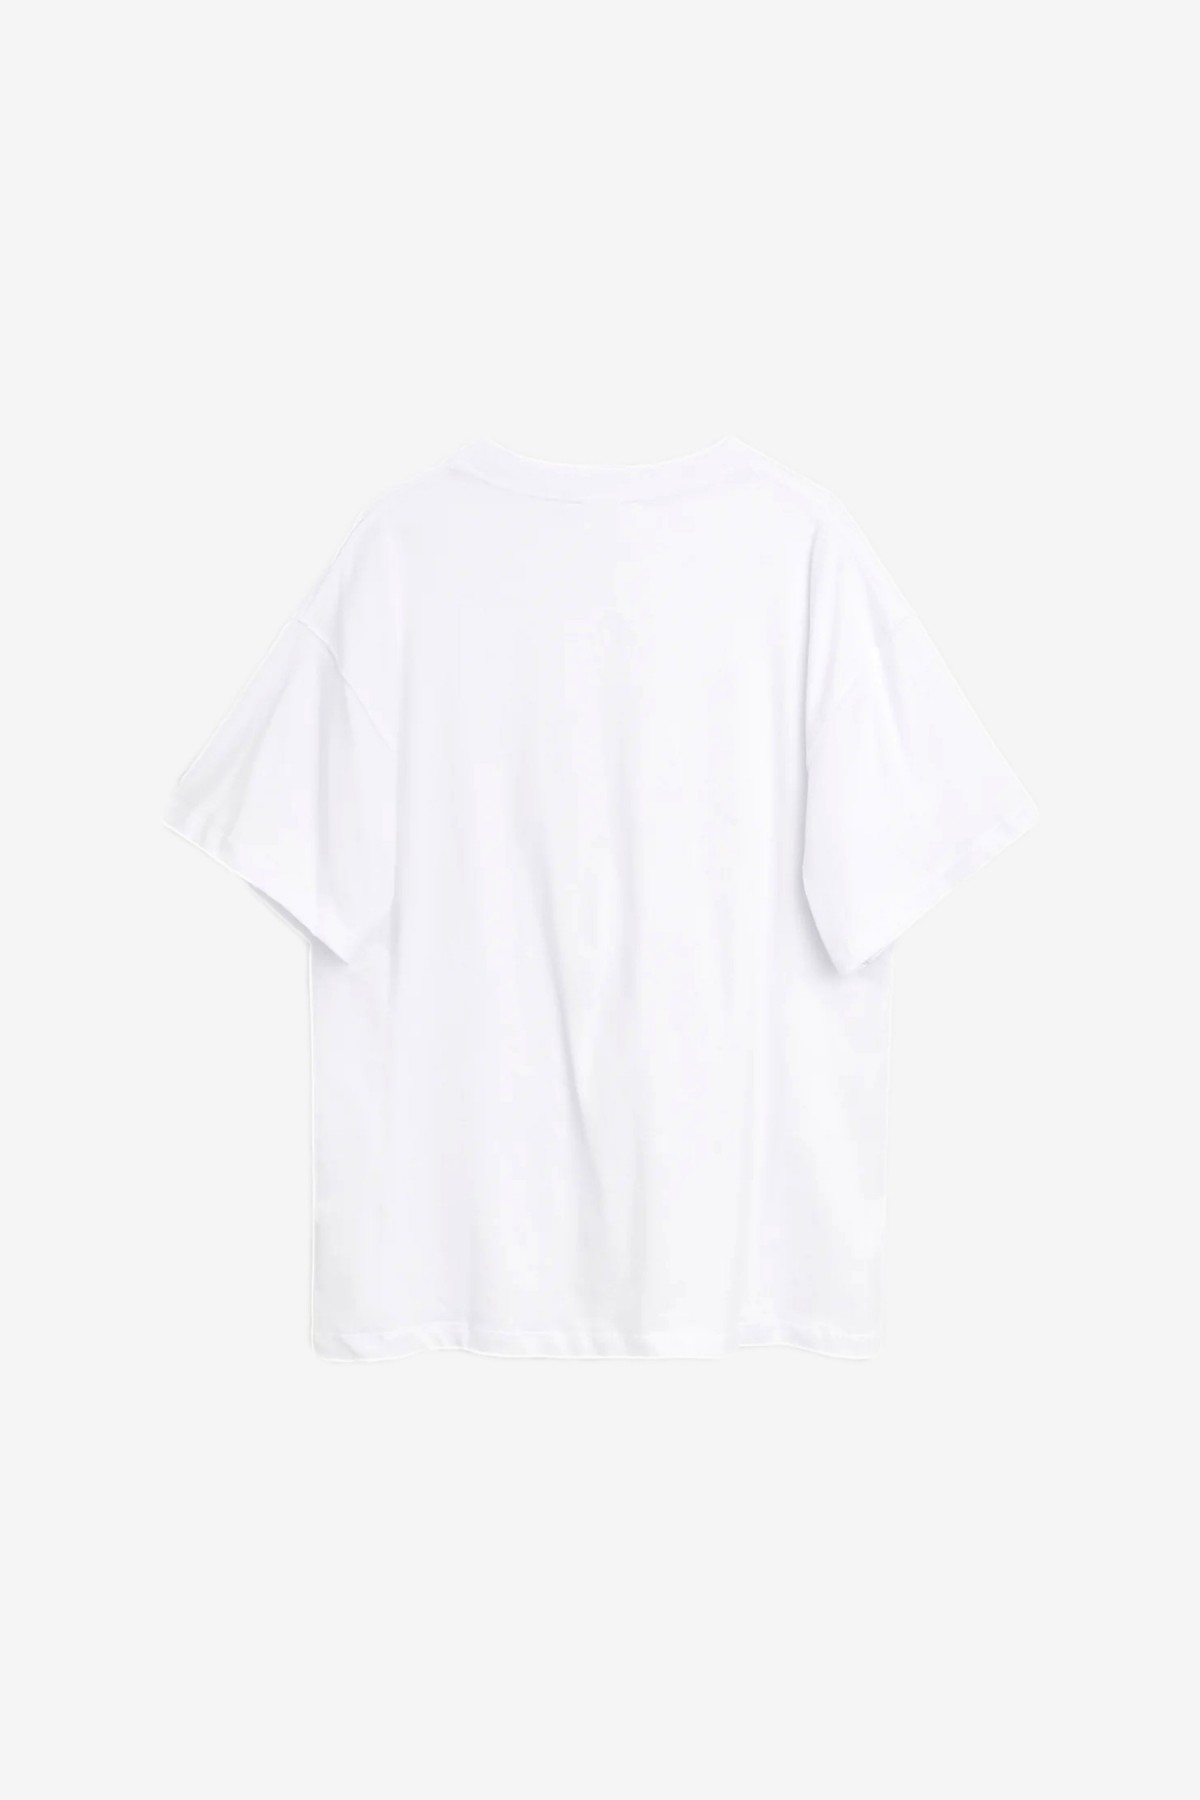 Soulland Ash T-Shirt in White